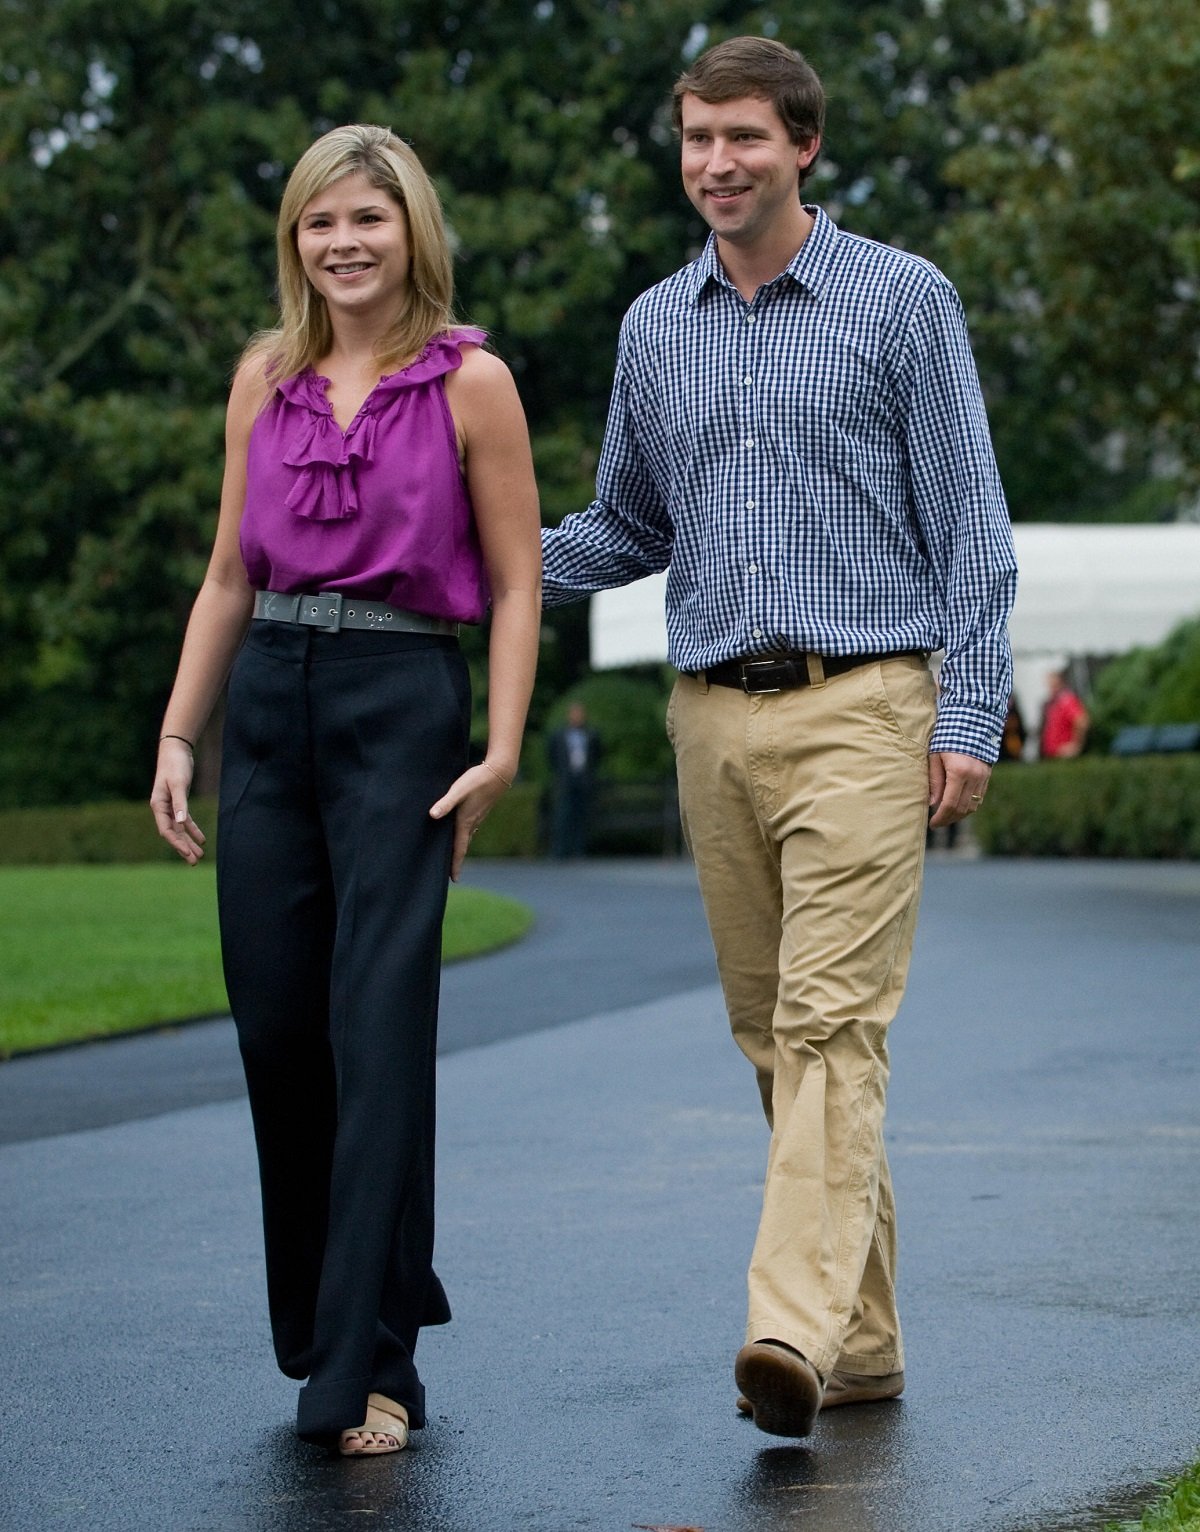 Jenna Bush Hager and Henry Hager in Washington, DC, on September 27, 2008 | Source: Getty Images